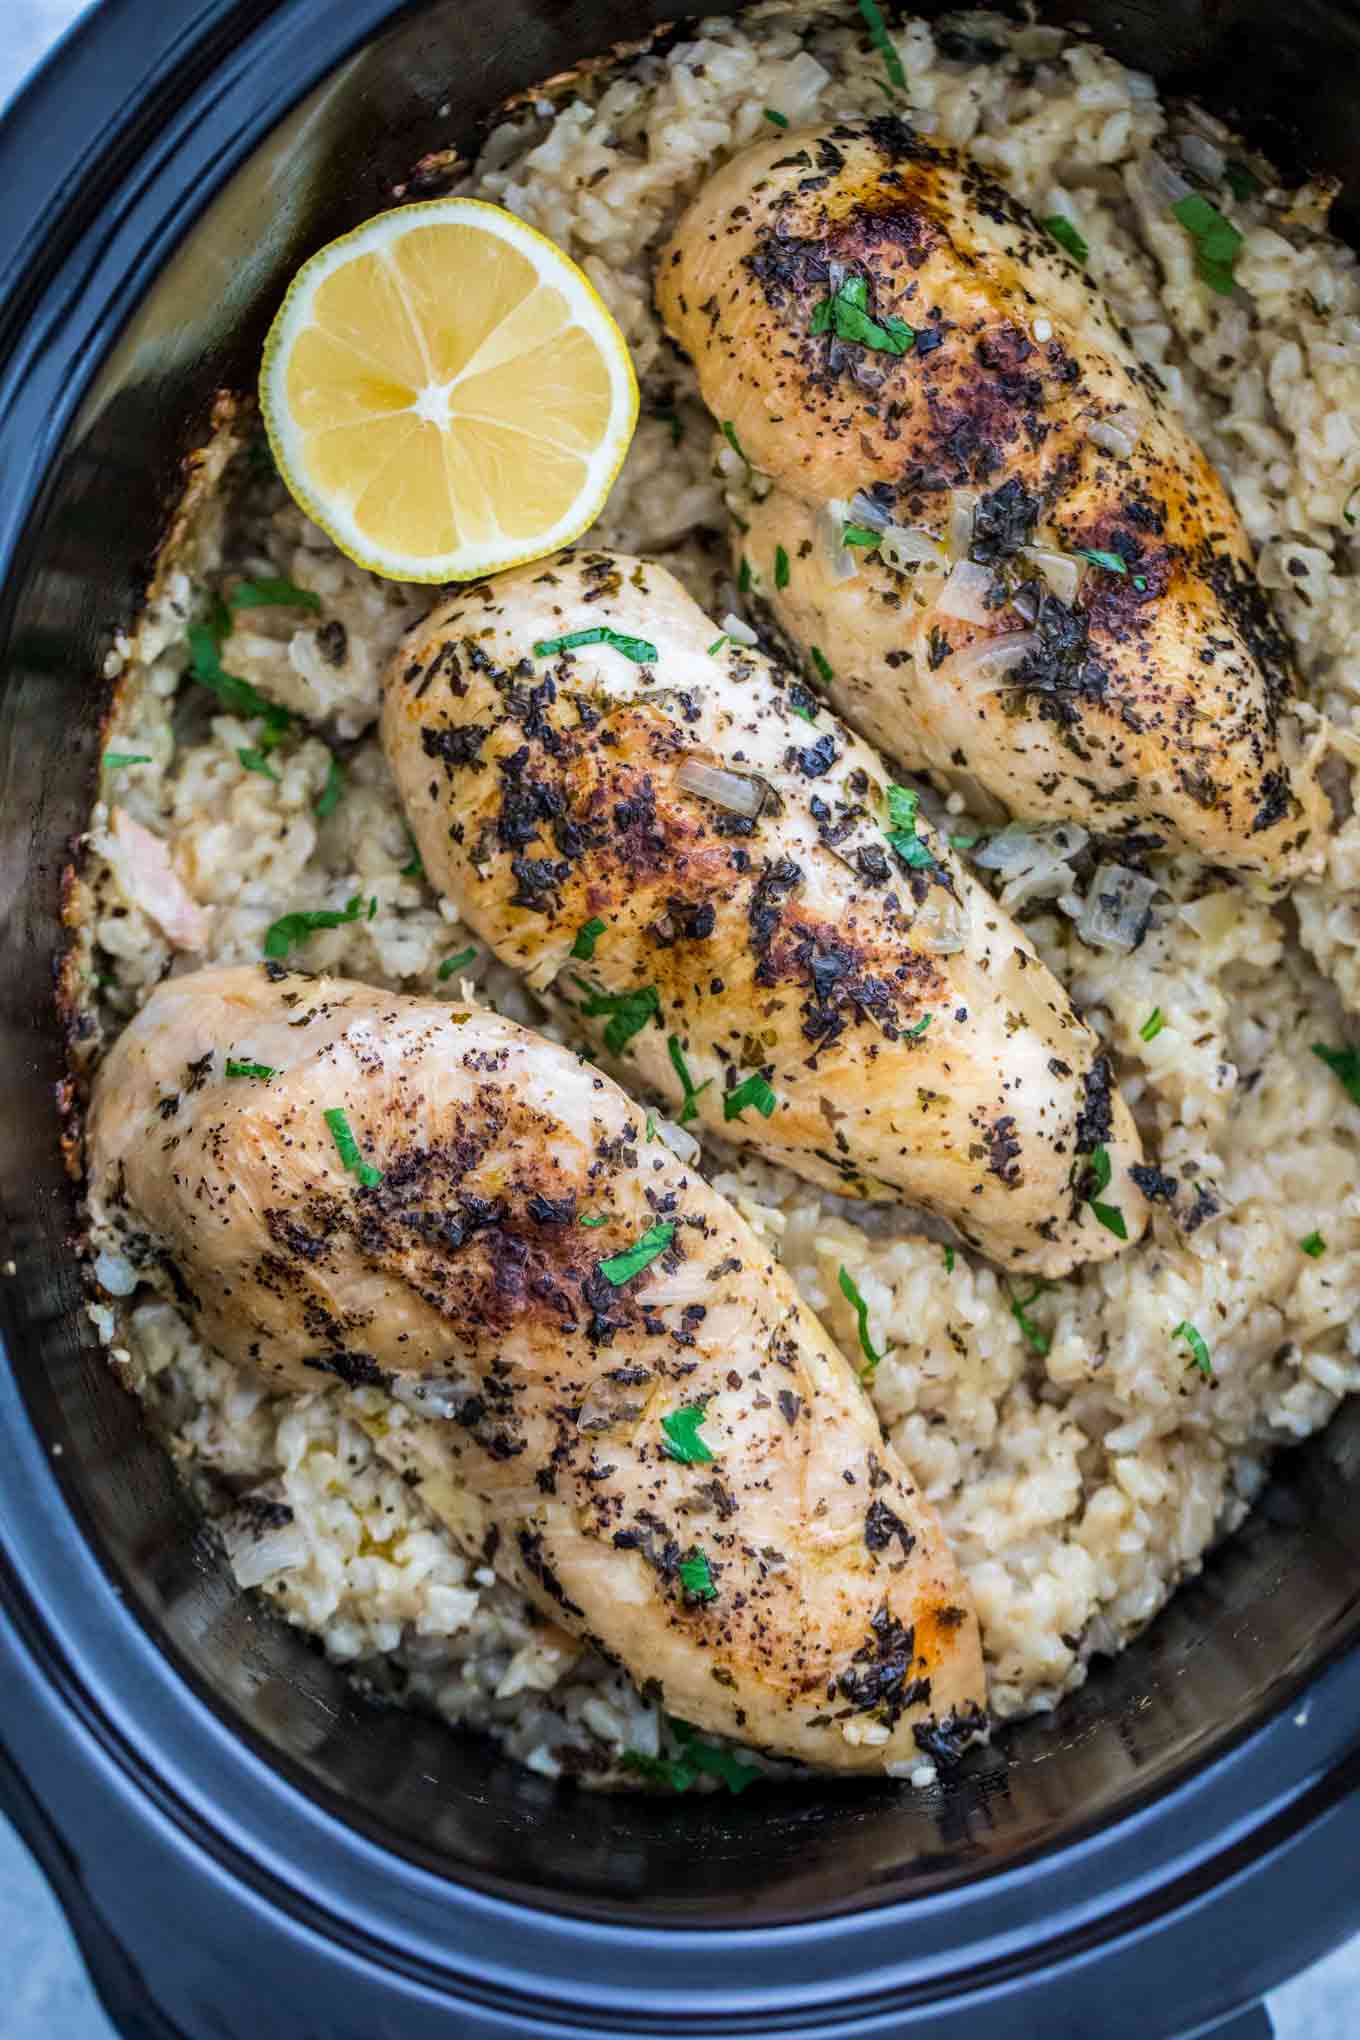 Crockpot Chicken And Rice Video Sweet And Savory Meals,Data Entry Jobs